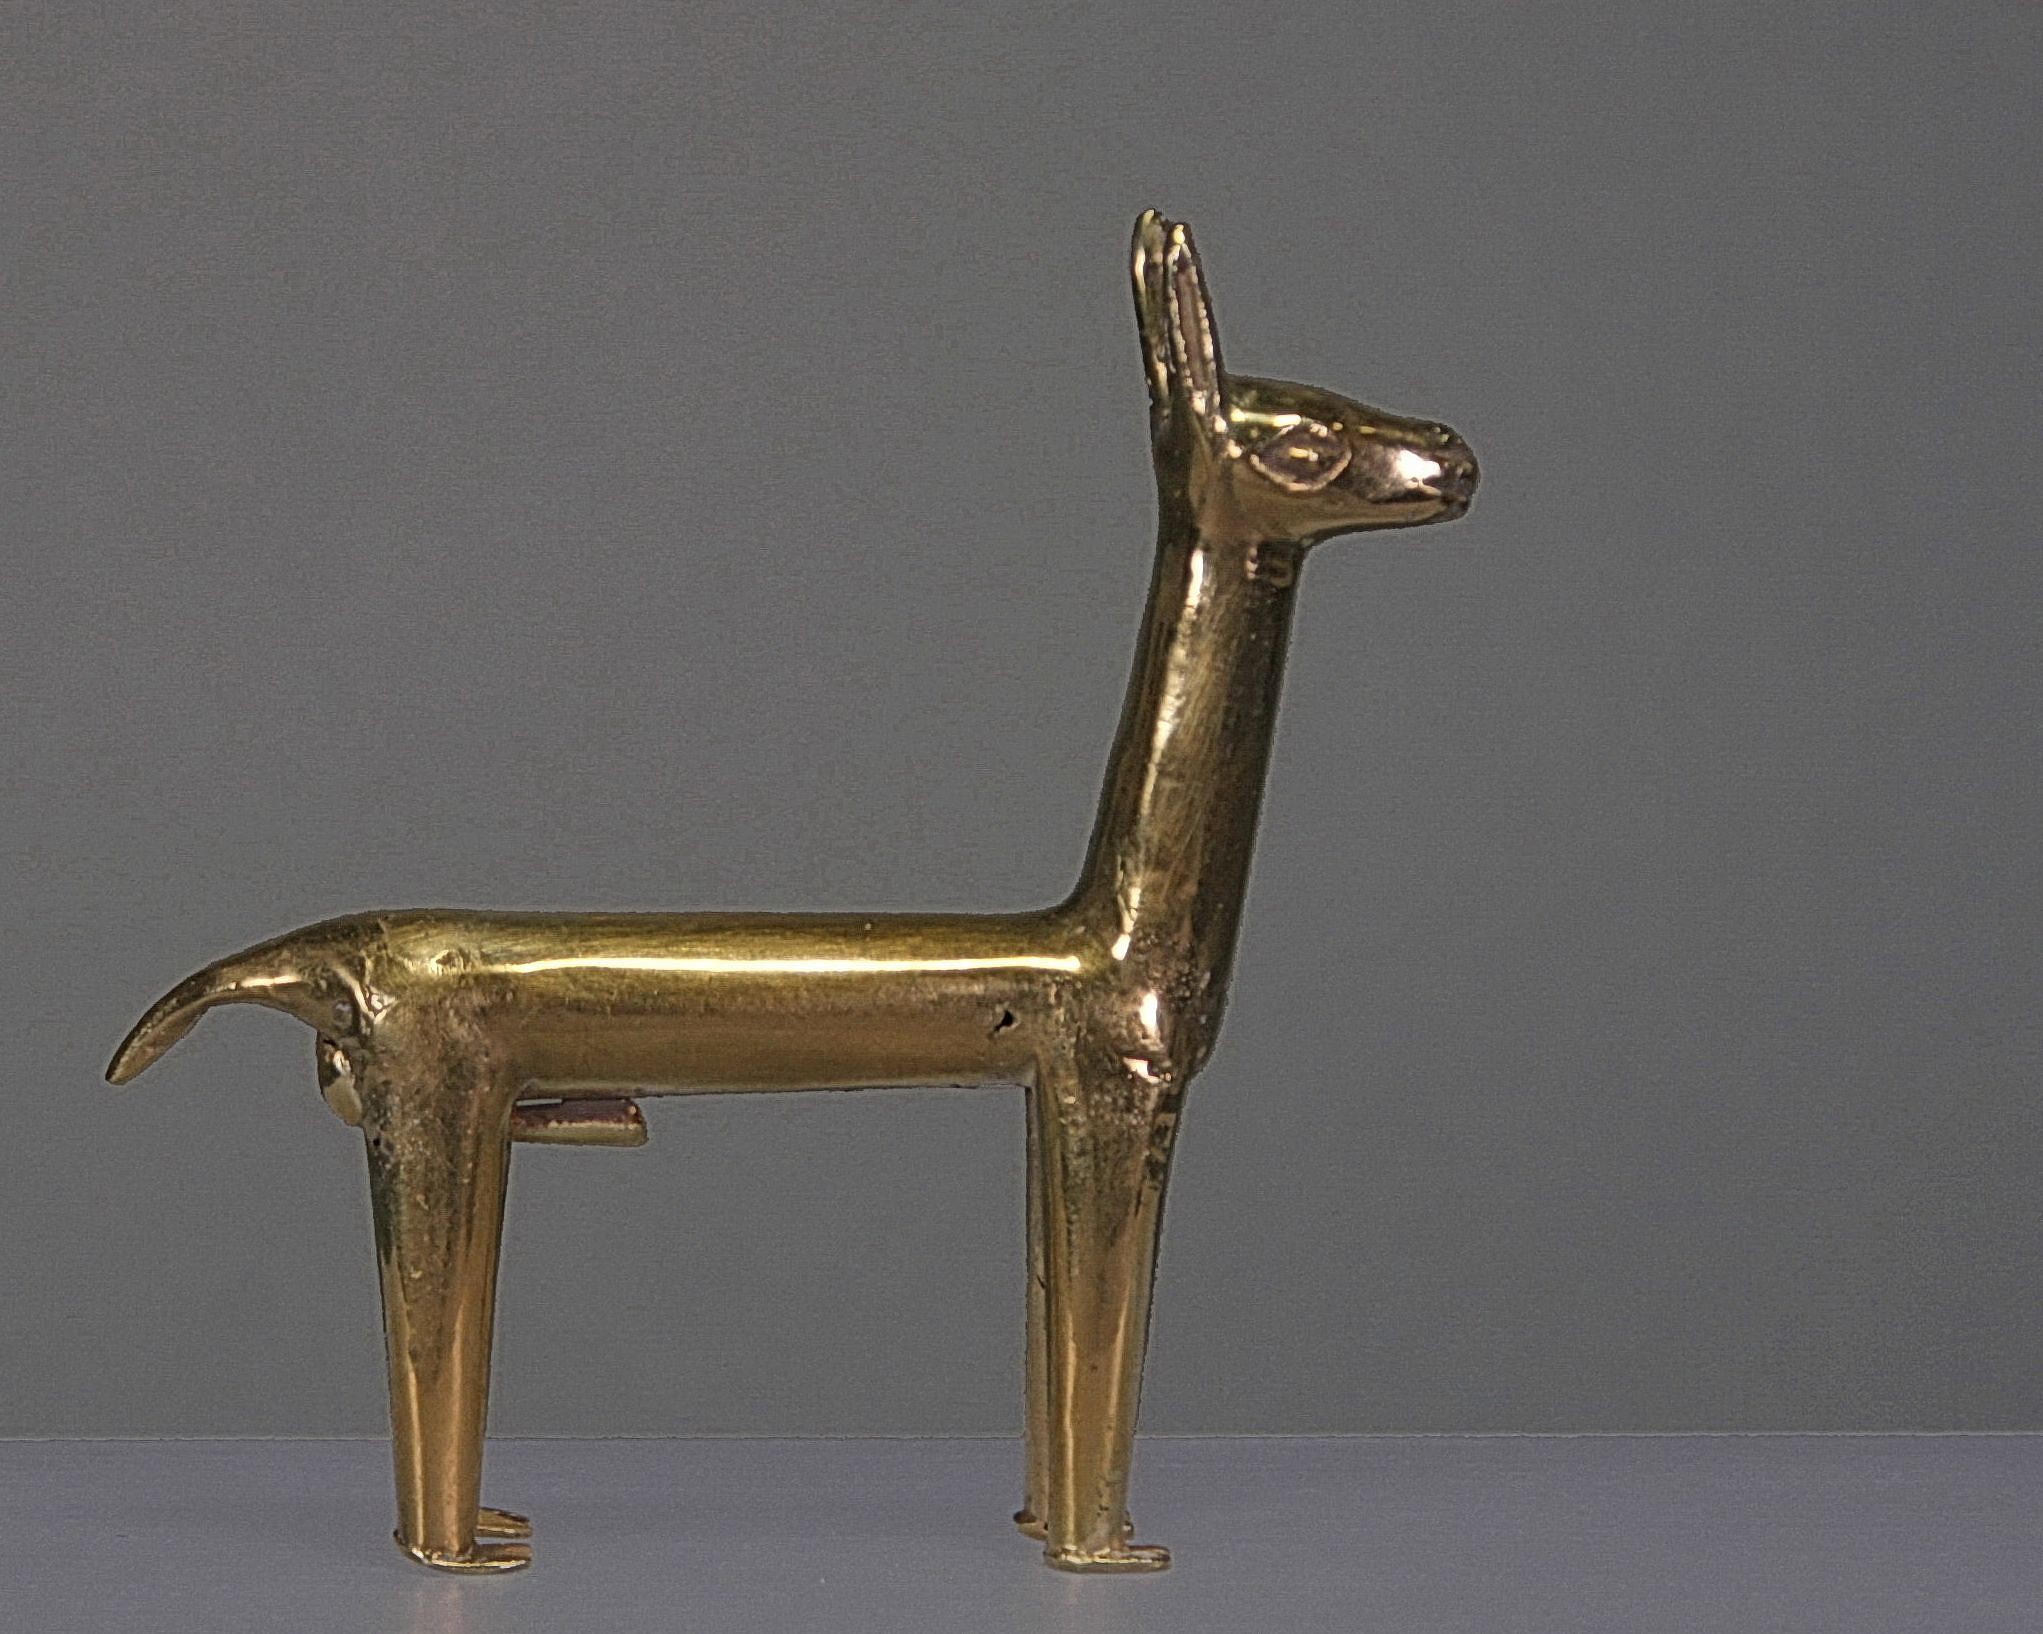 Peru, Inca Gold Hollow Llama
These Llamas, along with other miniatures in gold, silver and spondylus were found at high altitude sacrificial burials sites, used in a ceremony known as the Capac Hucha ceremony to praise the Inca.  A similar llama is illustrated in ANCIENT AMERICANS, Art From Sacred Landscapes p. 362.  This hollow llama was assembled from hammered gold sheets which were soldered together.  One seam can be easily seen along the underside.  Ex. New York collector, prior to 1970.
Media: Metal
Dimensions: Height: 2.5"   Weight: grams 9.6XRF: Au. 66.4%, Ag. 24.6% , Cu8.8%
&bull;SOLD
n7053